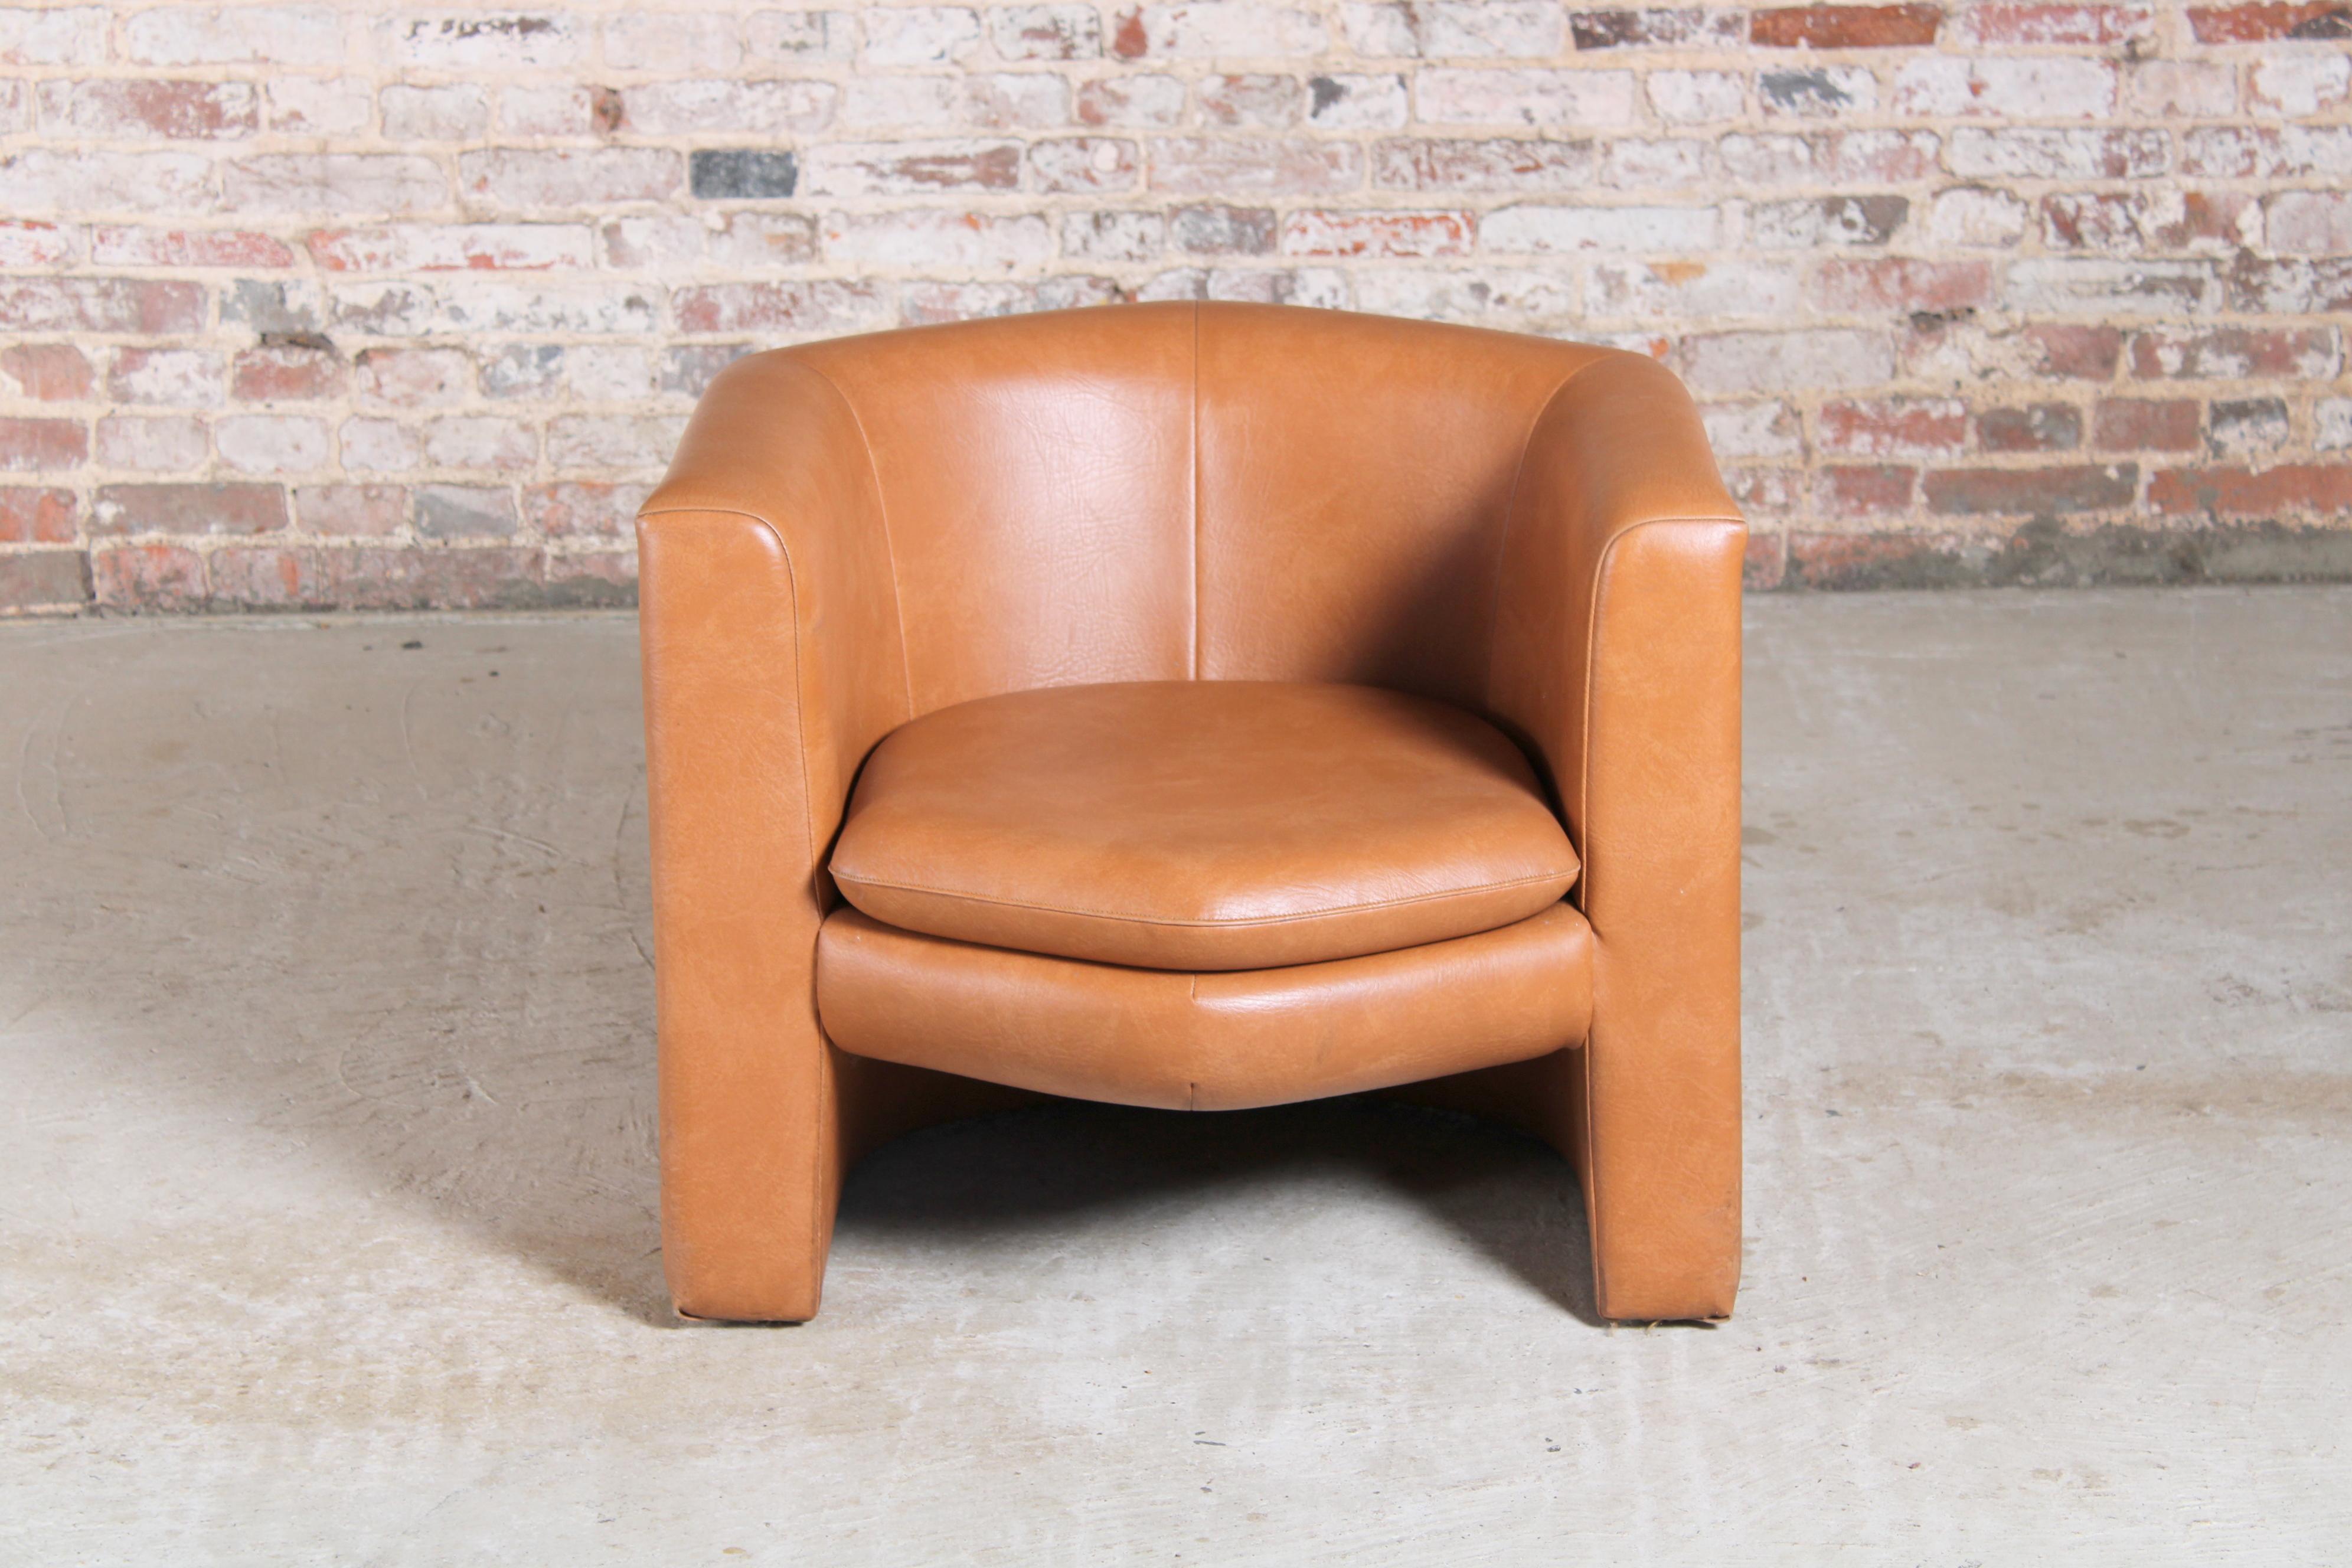 Mid Century ’Hexagon’ armchair designed by Peter Murdoch and made by Hille of London Ltd., 1967. Tan leatherette upholstery in excellent condition. 

Dimensions: W 72 x D 76 x H 60 cm
Seat height: 39 cm.